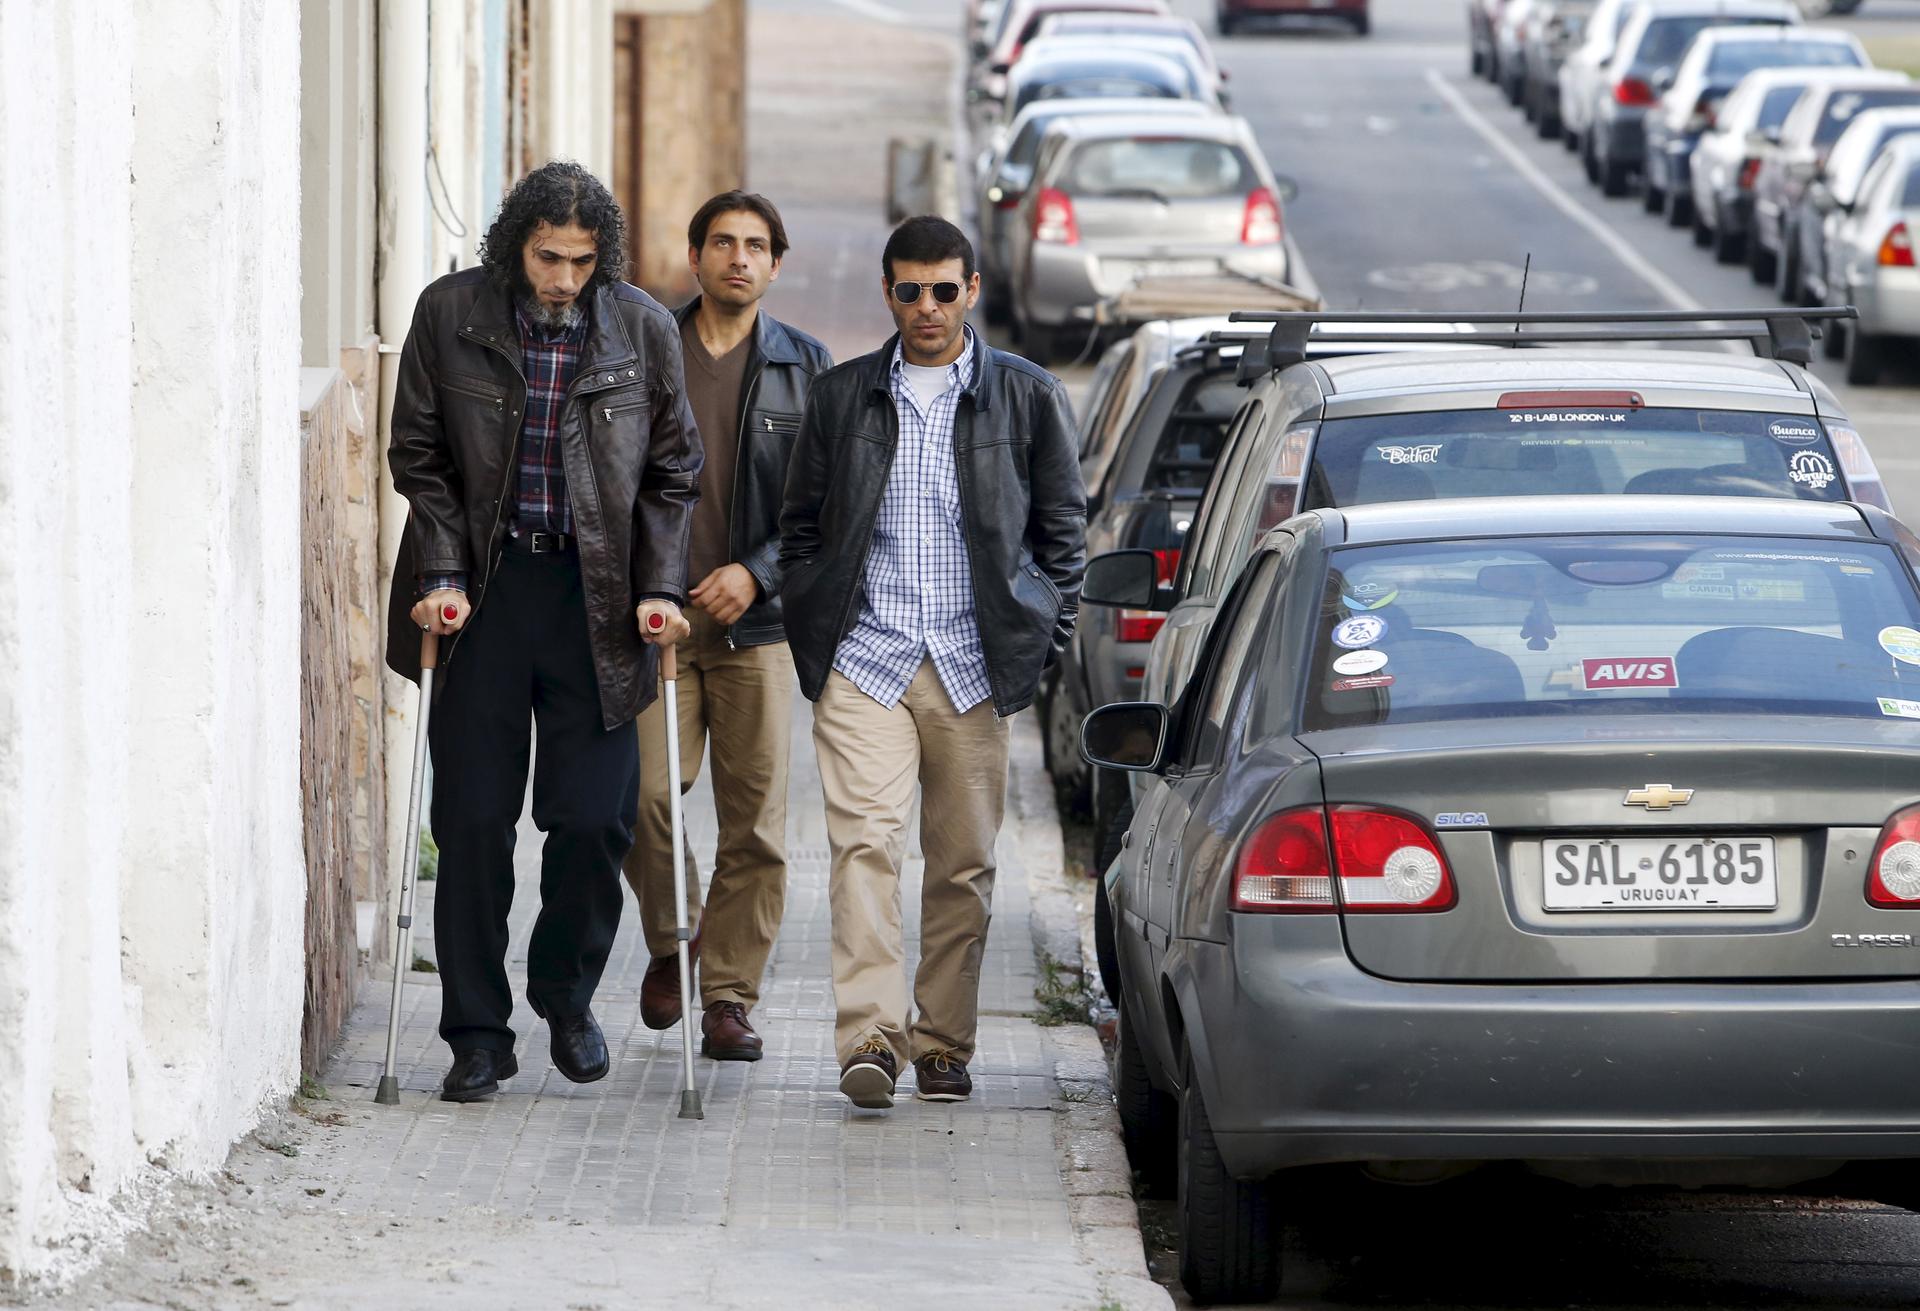 Former Guantanamo detainees from Syria (L-R) Jihad Diyab, Ahmed Adnan Ahjam and Ali Hussain Shaabaan, arrive to attend the wedding of fellow ex-detainee Abdul Bin Mohammed Abis Ourgy (not pictured) of Tunisia, in Montevideo, June 5, 2015. They are part of